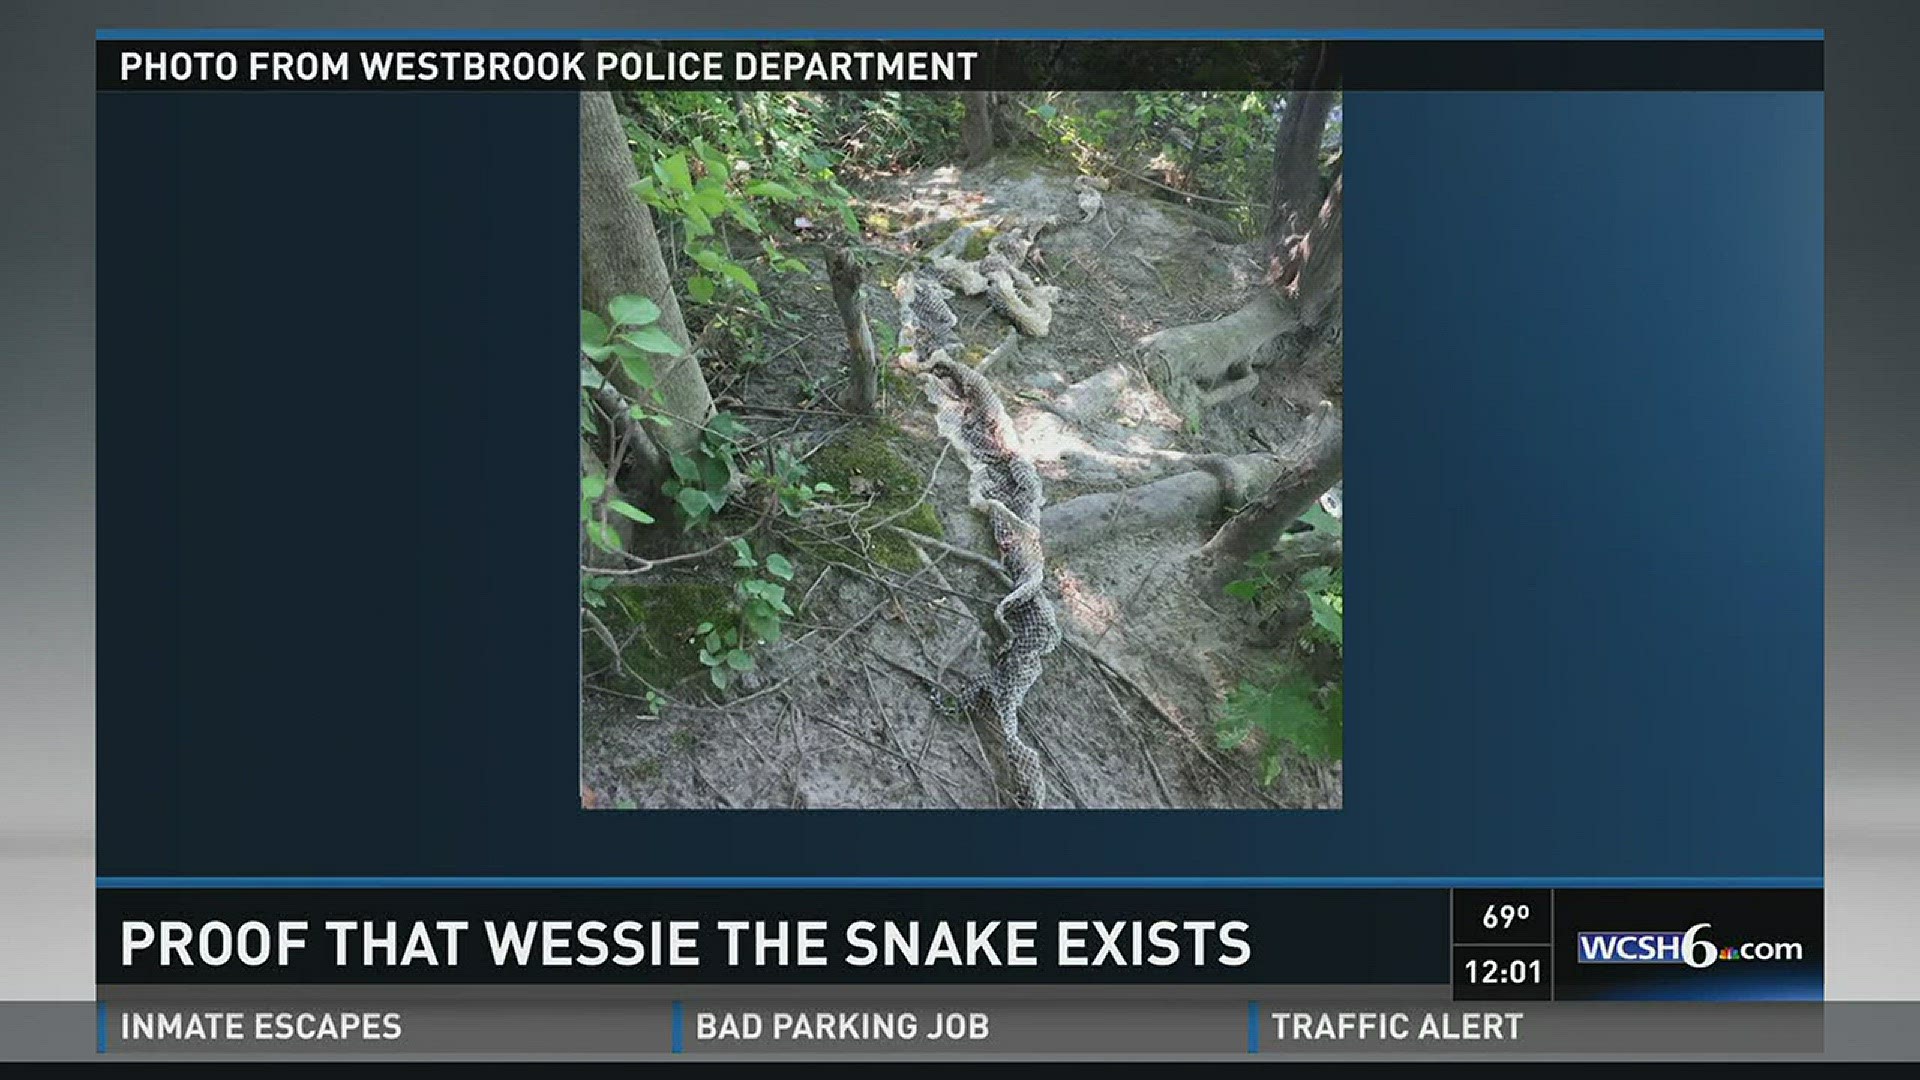 Proof that Wessie the snake exists